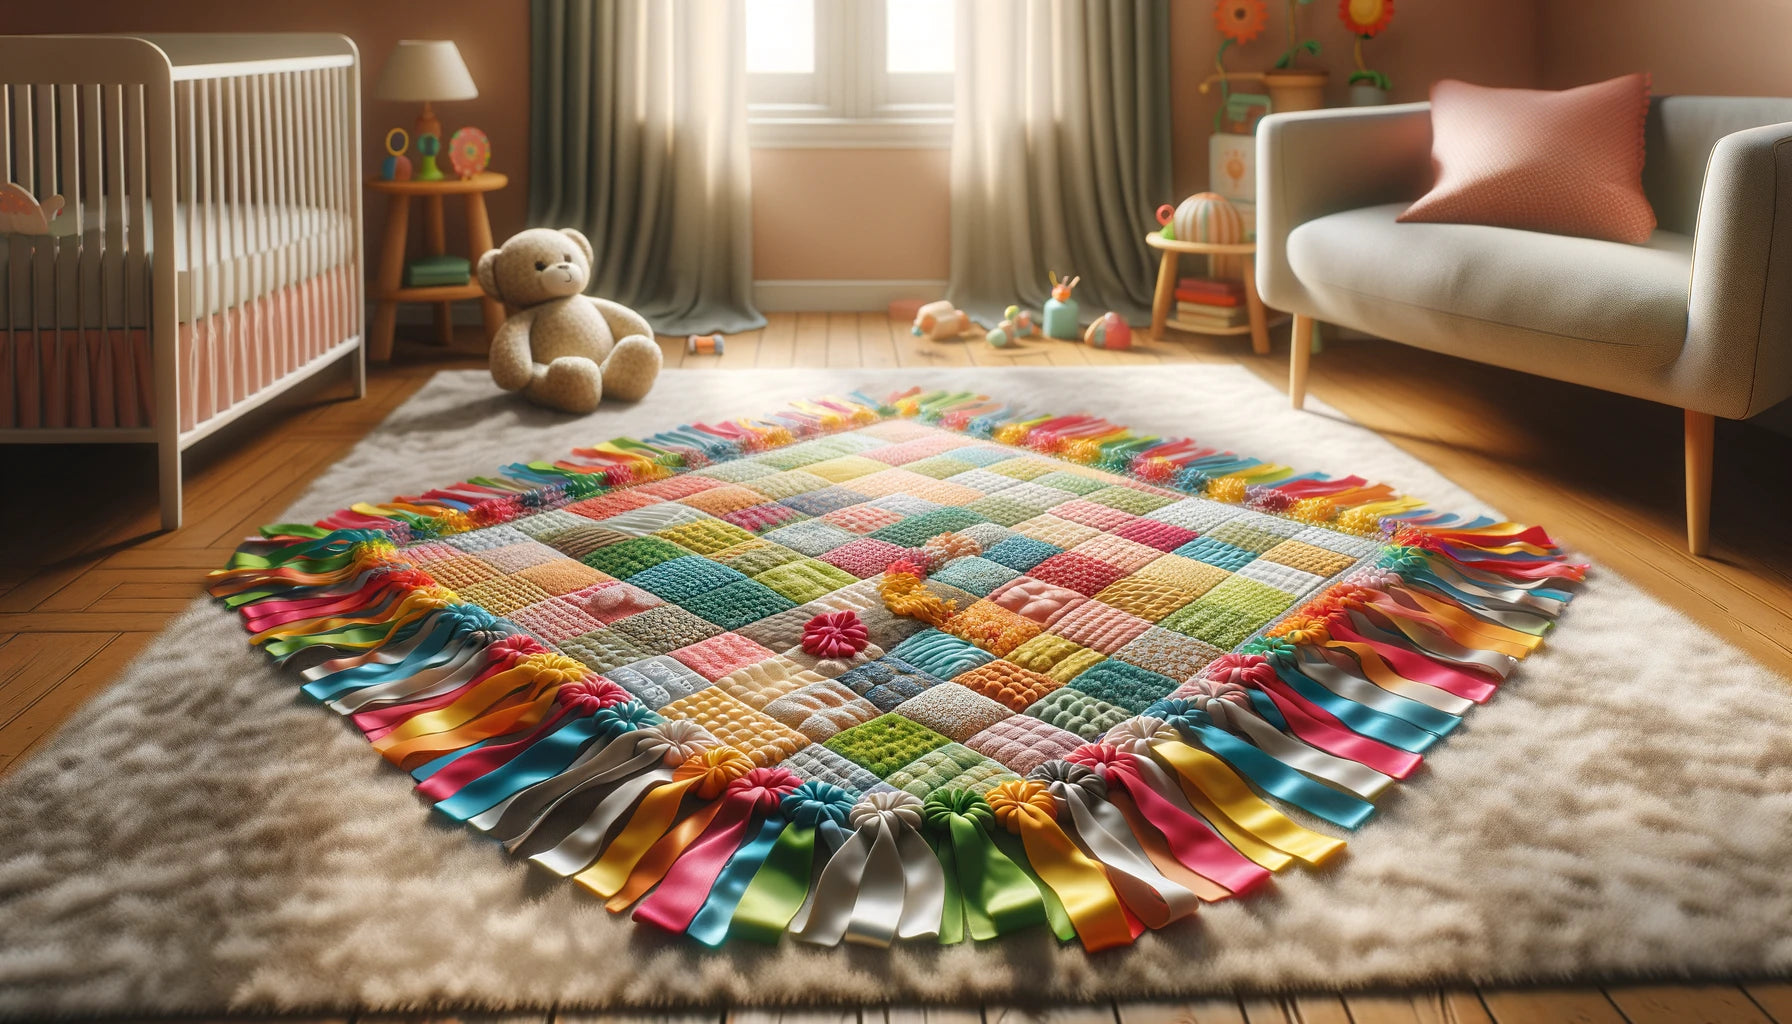 How to Make a Taggie Blanket: A Simple DIY Guide for Parents